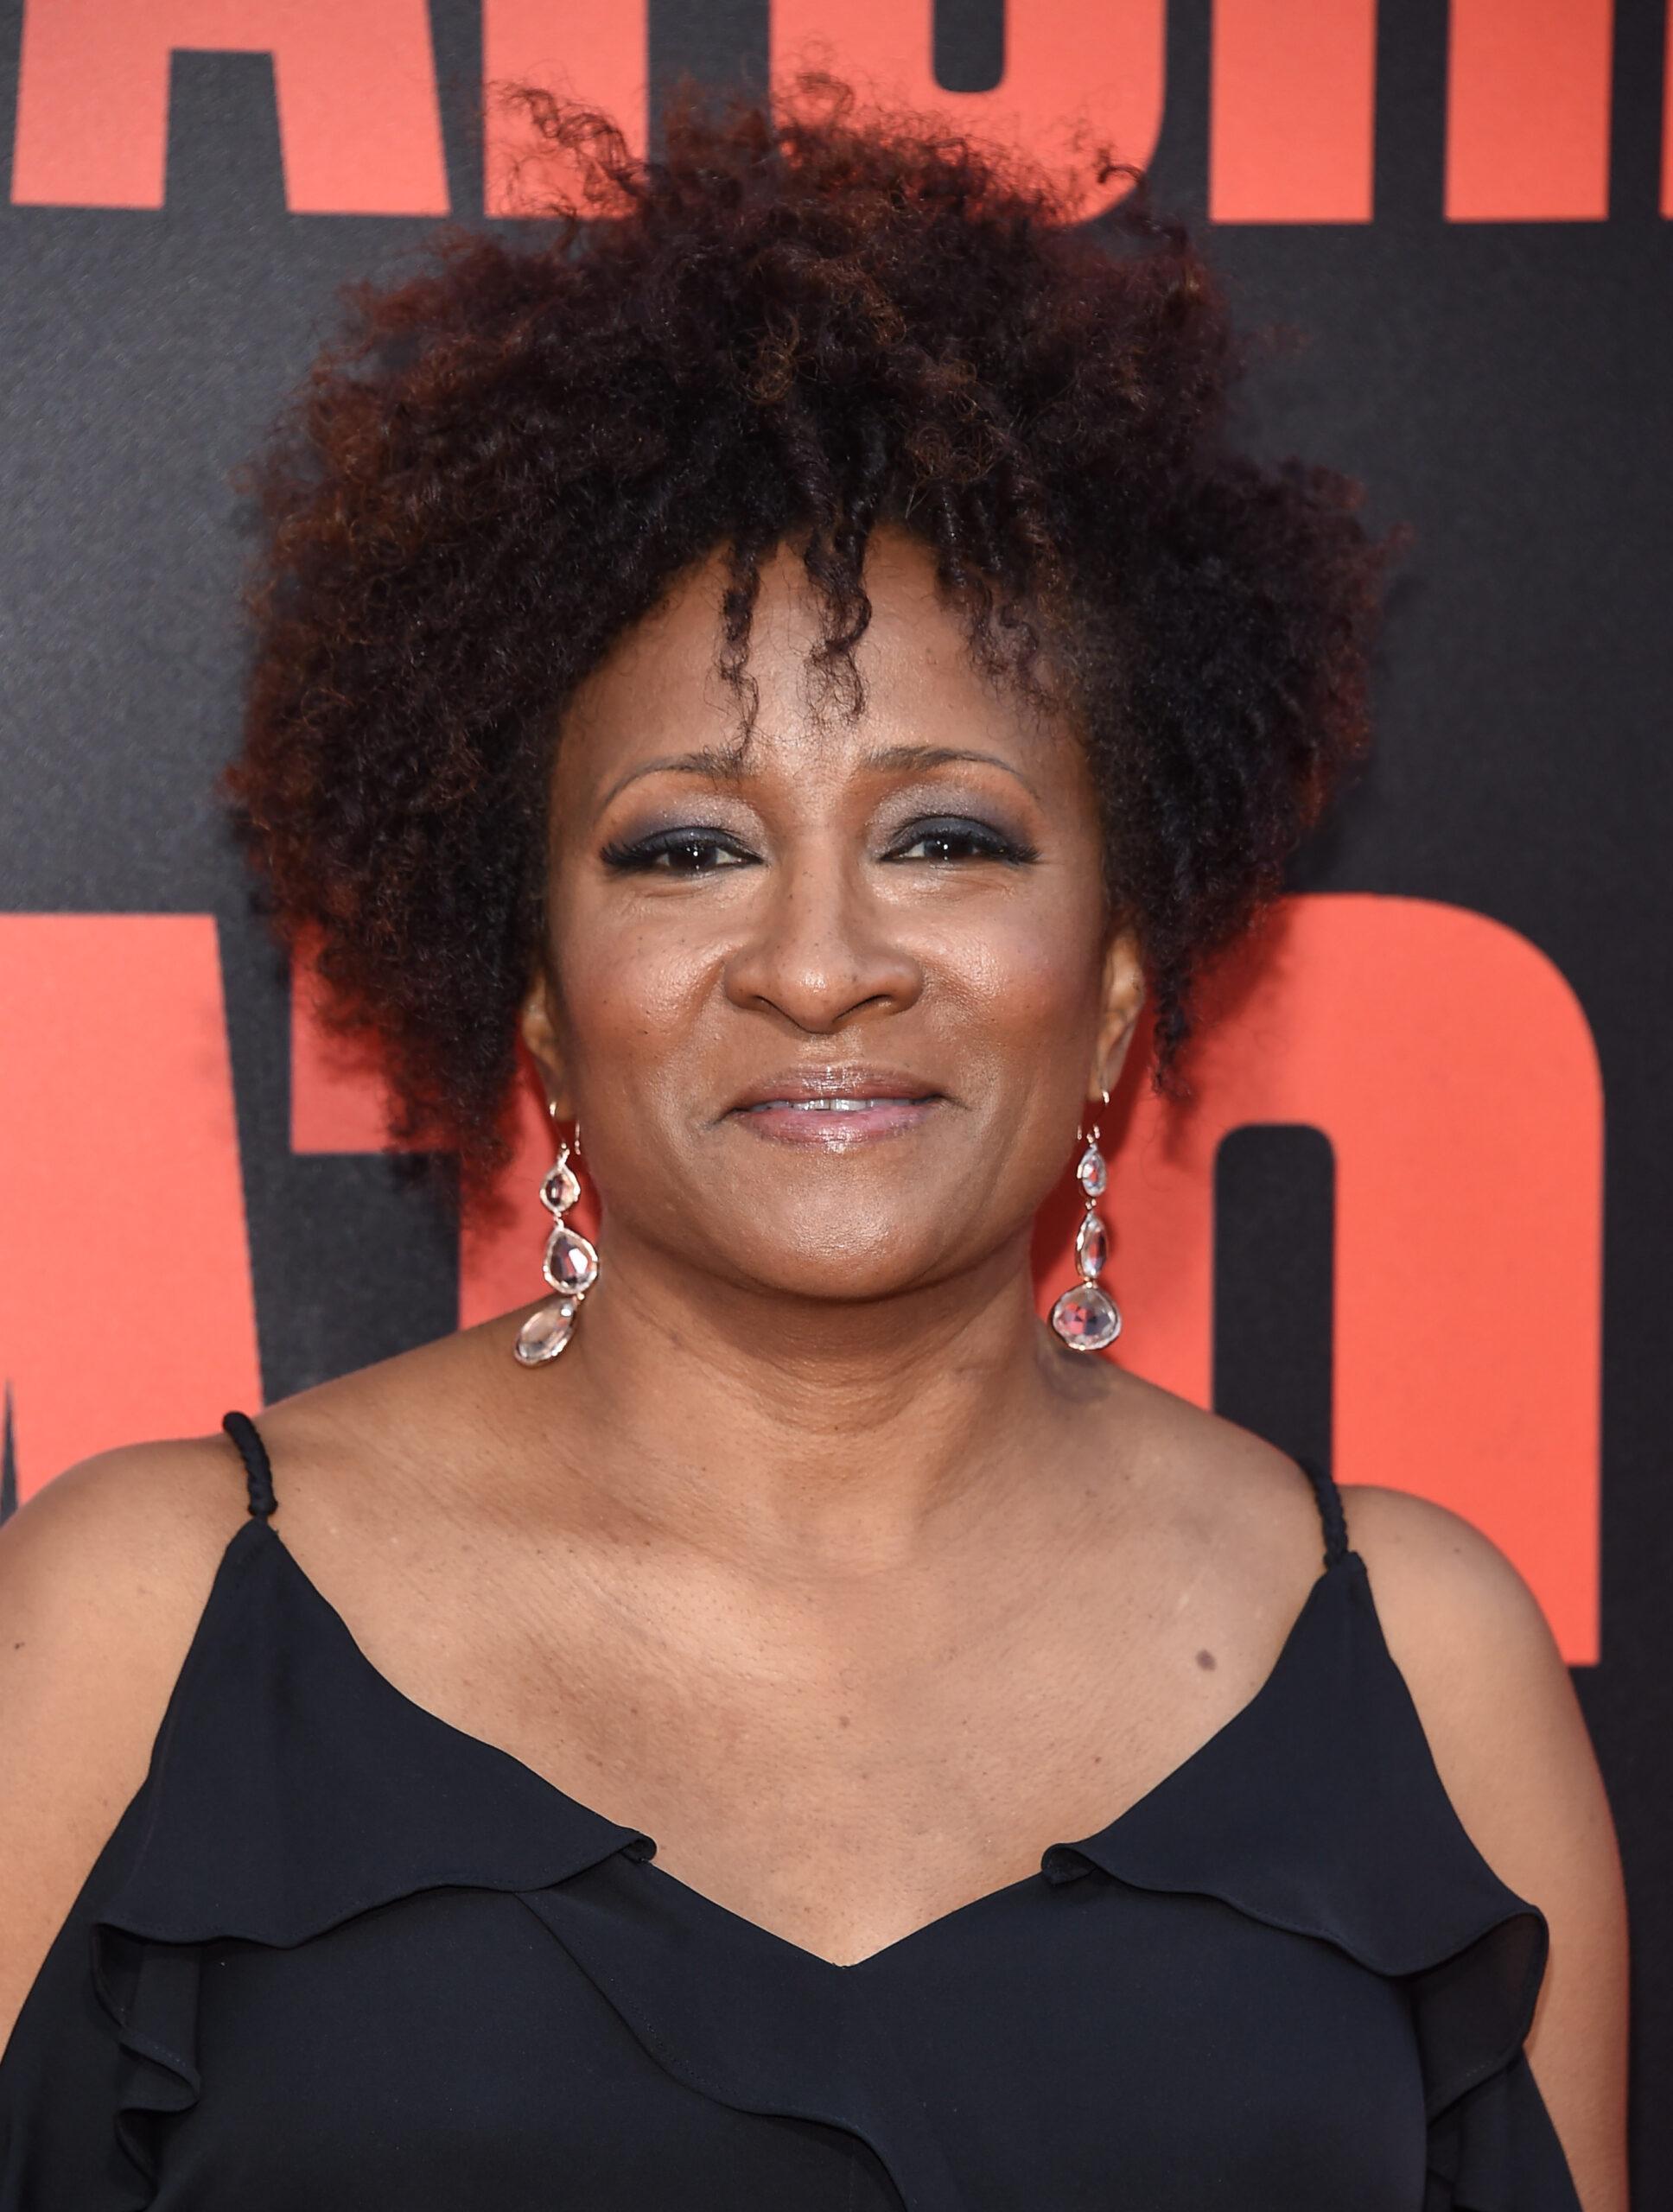 Wanda Sykes at the 'Snatched' World Premiere